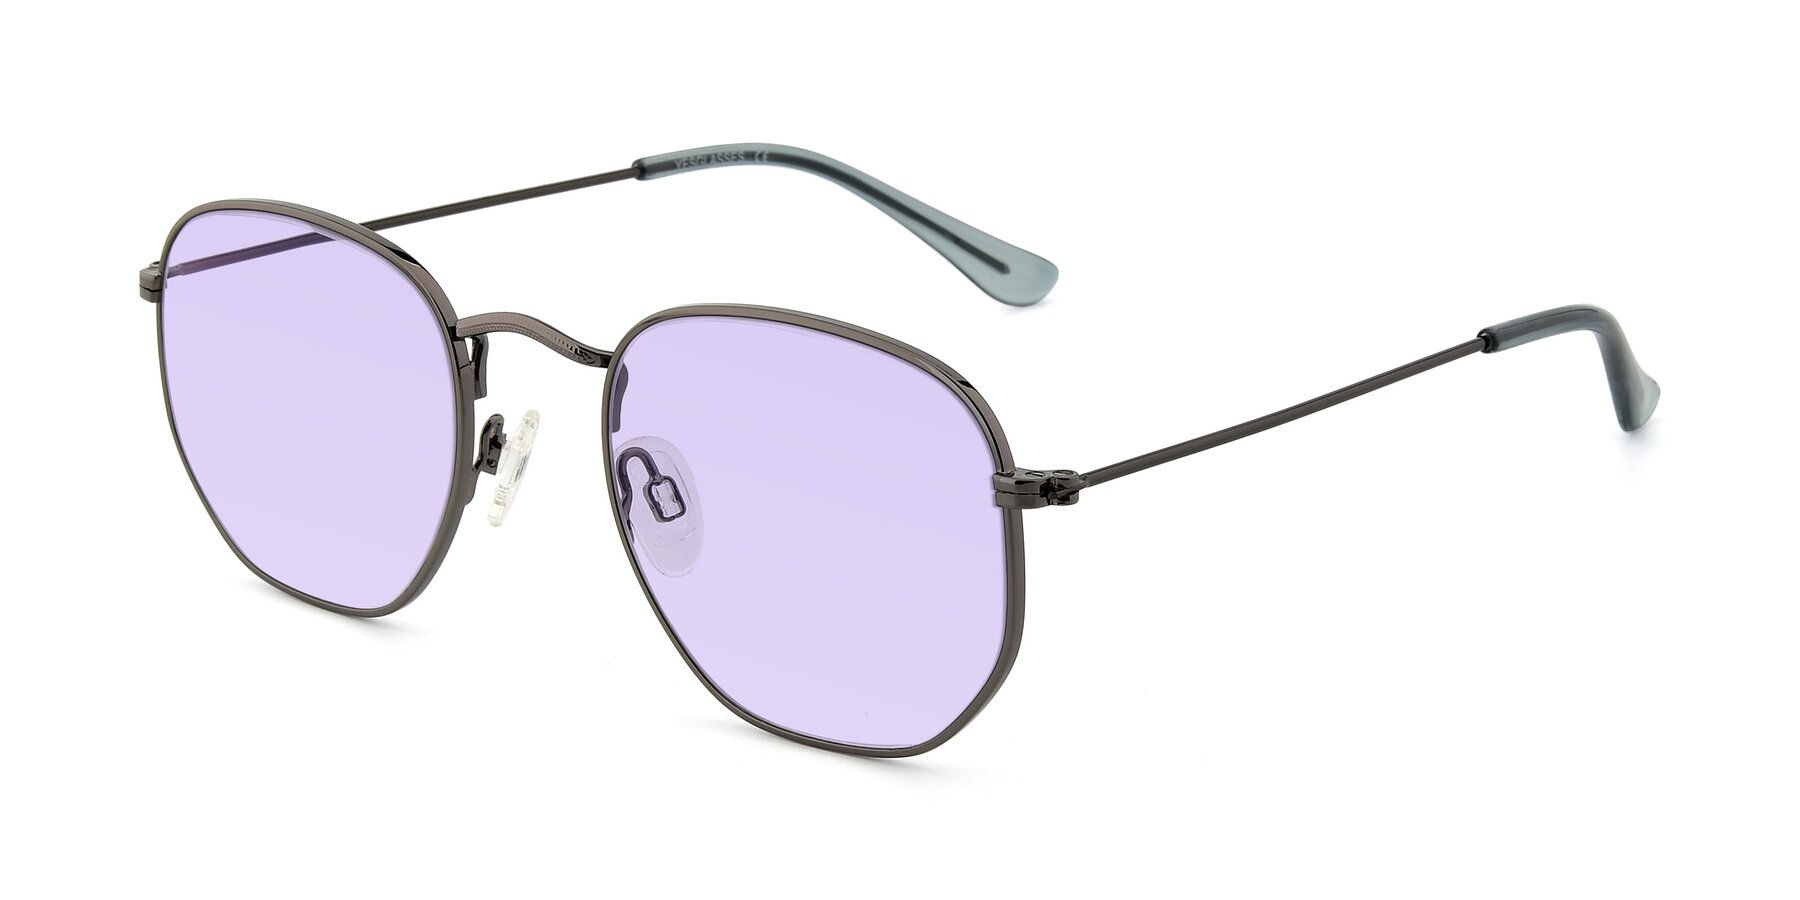 Angle of SSR1944 in Grey with Light Purple Tinted Lenses